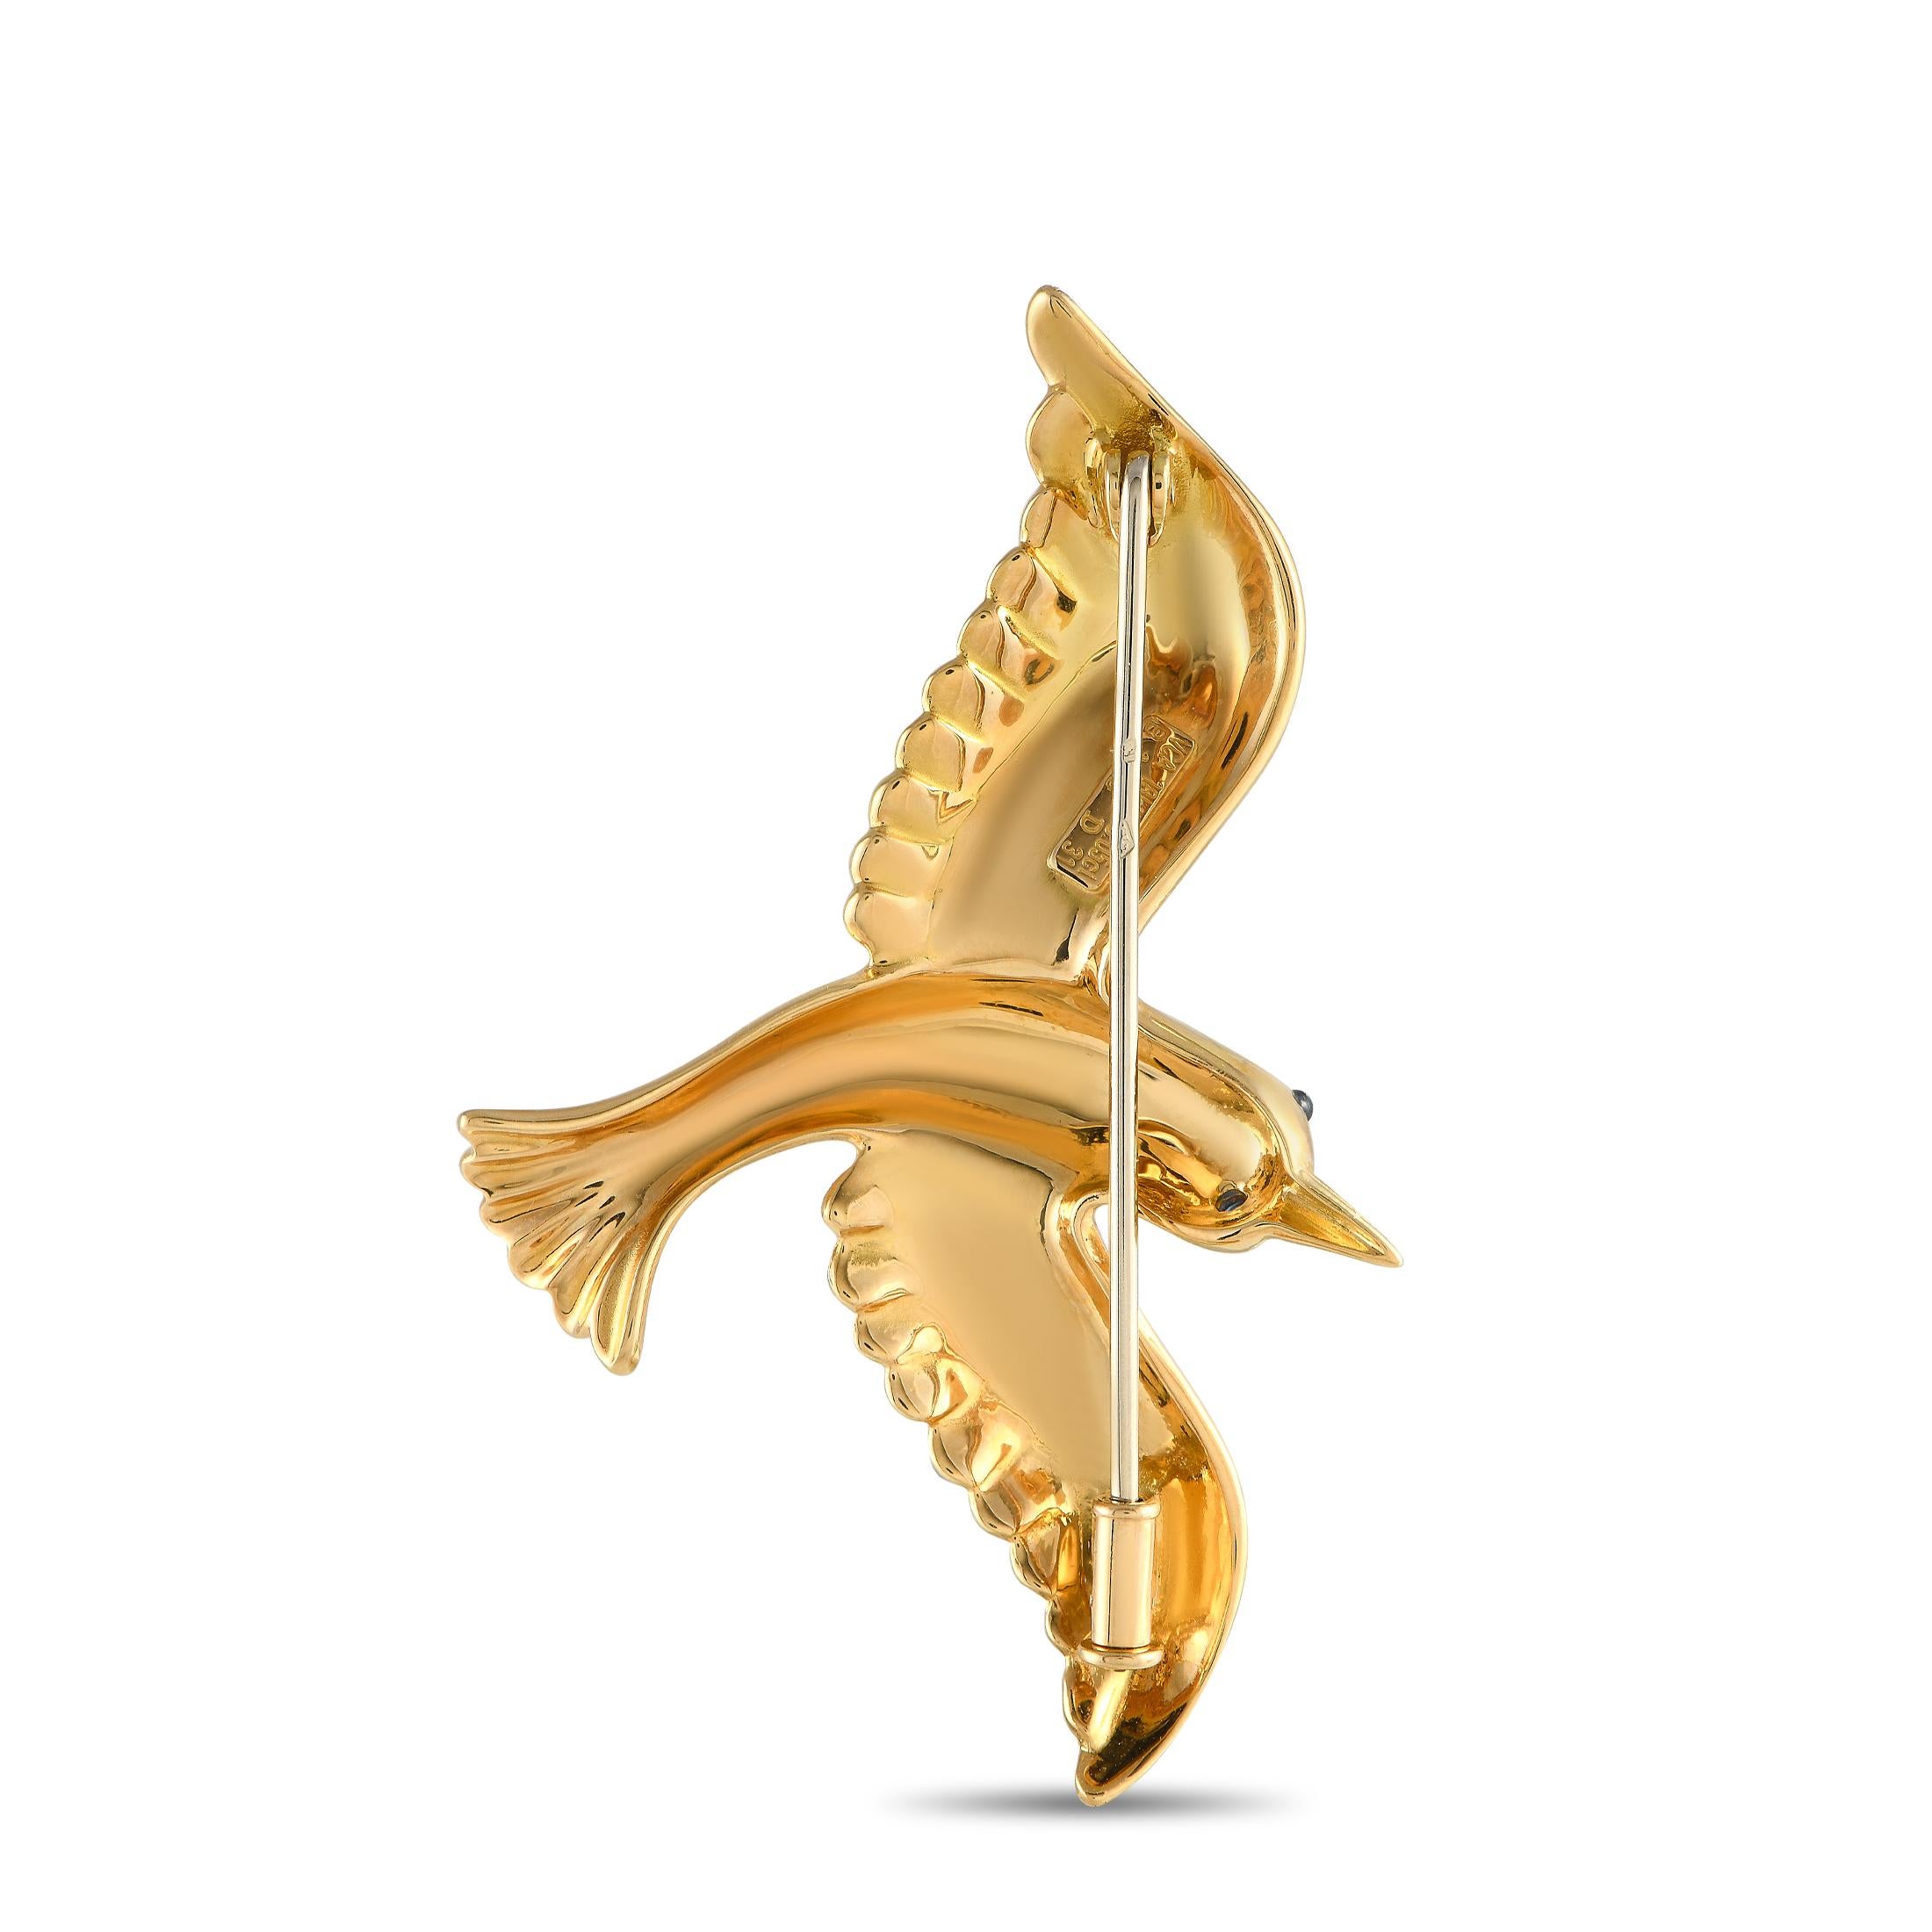 This vintage Van Cleef & Arpels brooch will serve as a stunning addition to any jewelry collection. The intricate design is crafted from 18K yellow gold and beautifully depicts a bird in flight. It measures 1.35” long and 2.15” wide. 

This jewelry